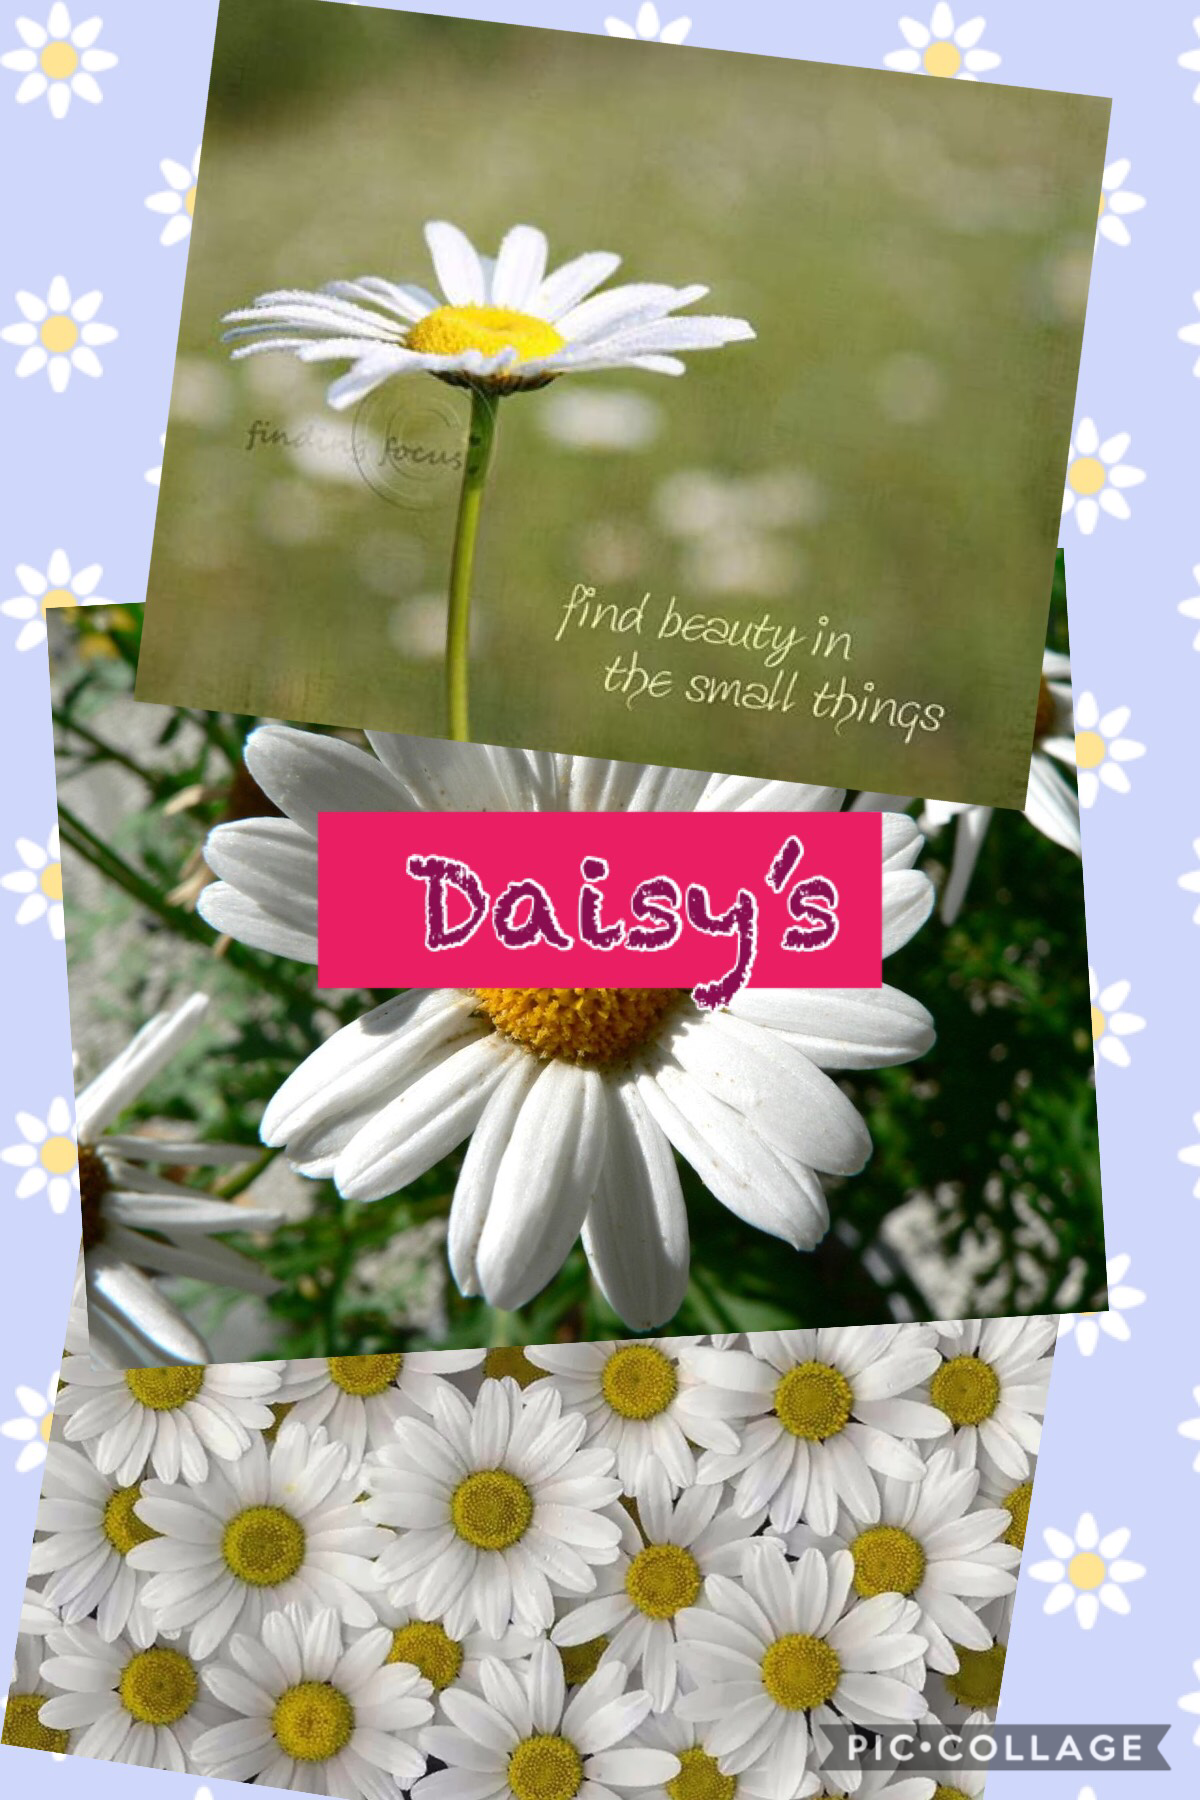 Tap

Daisy’s
Are 
Brilliant 
Flowers 